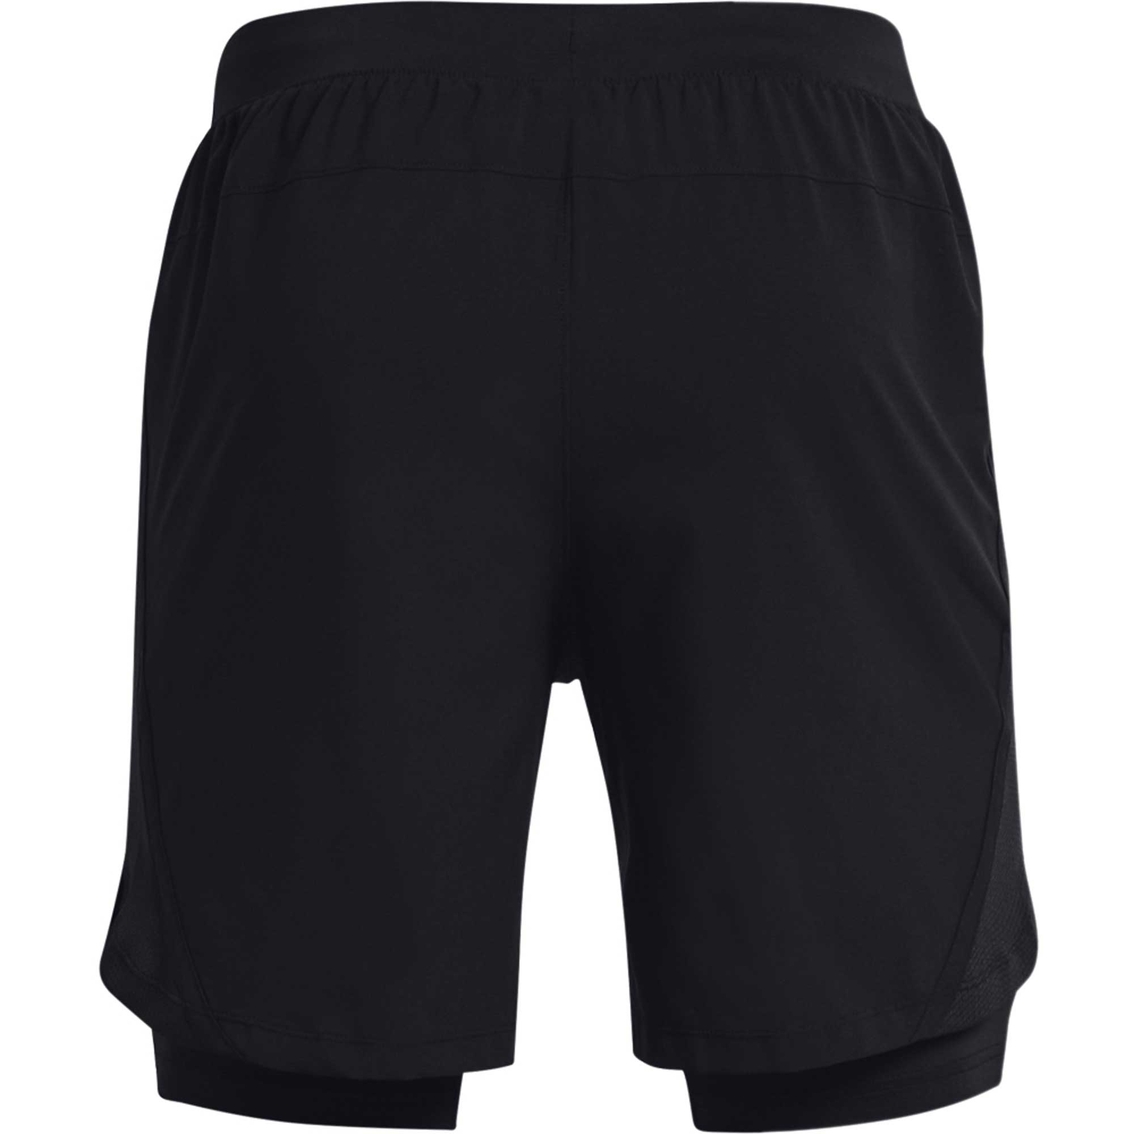 Under Armour Launch Run 2-in-1 Shorts | Shorts | Clothing & Accessories ...